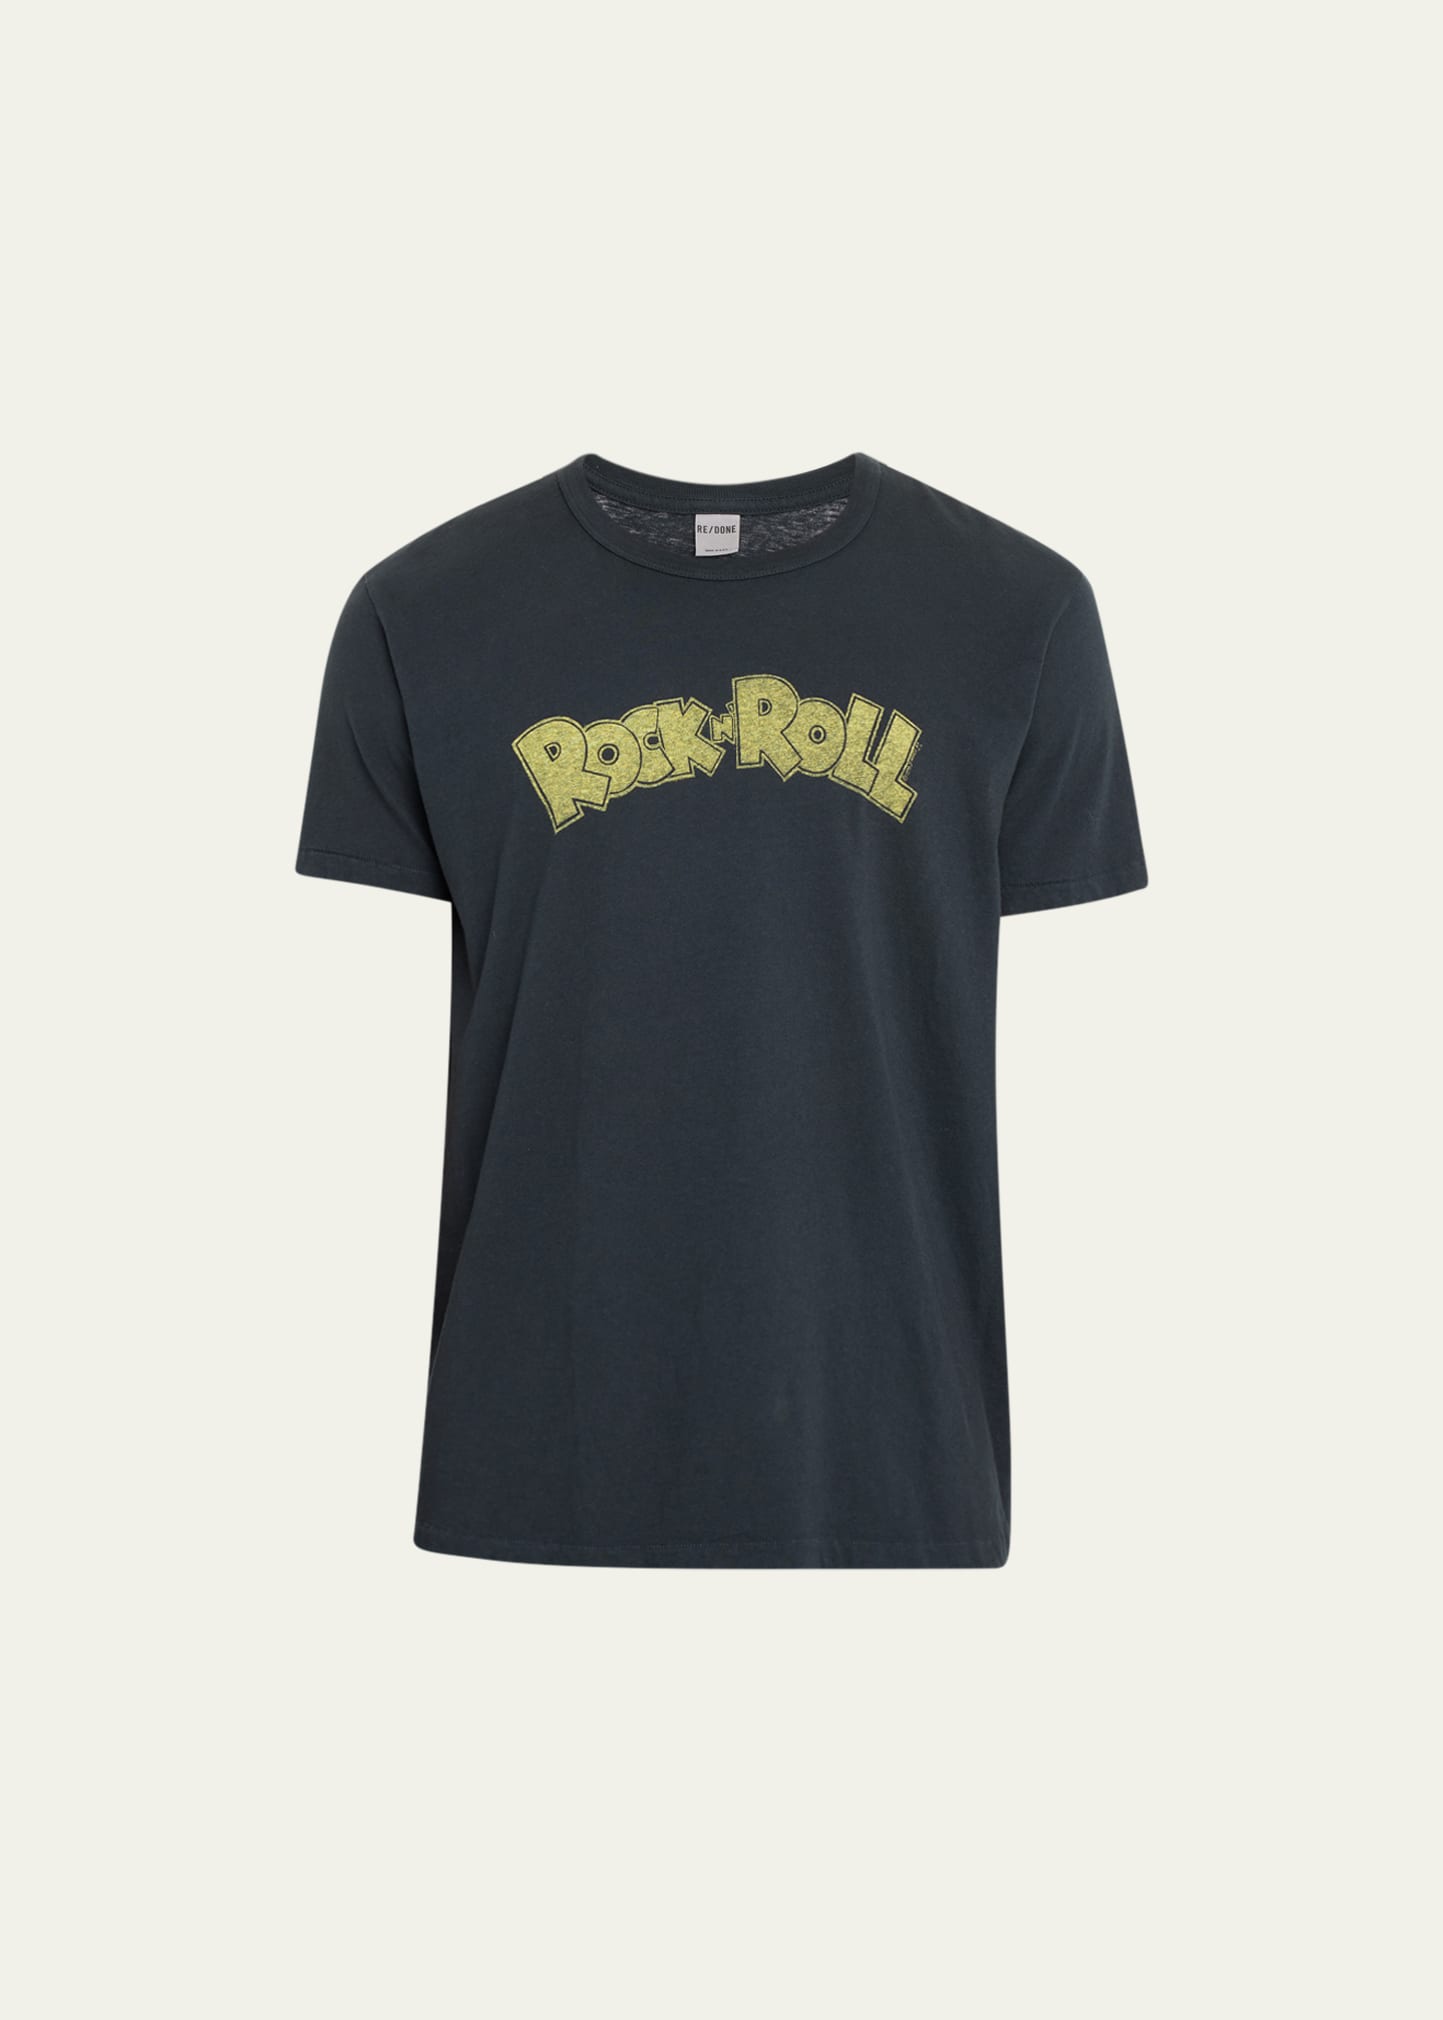 RE/DONE MEN'S FADED ROCK N ROLL CLASSIC TEE